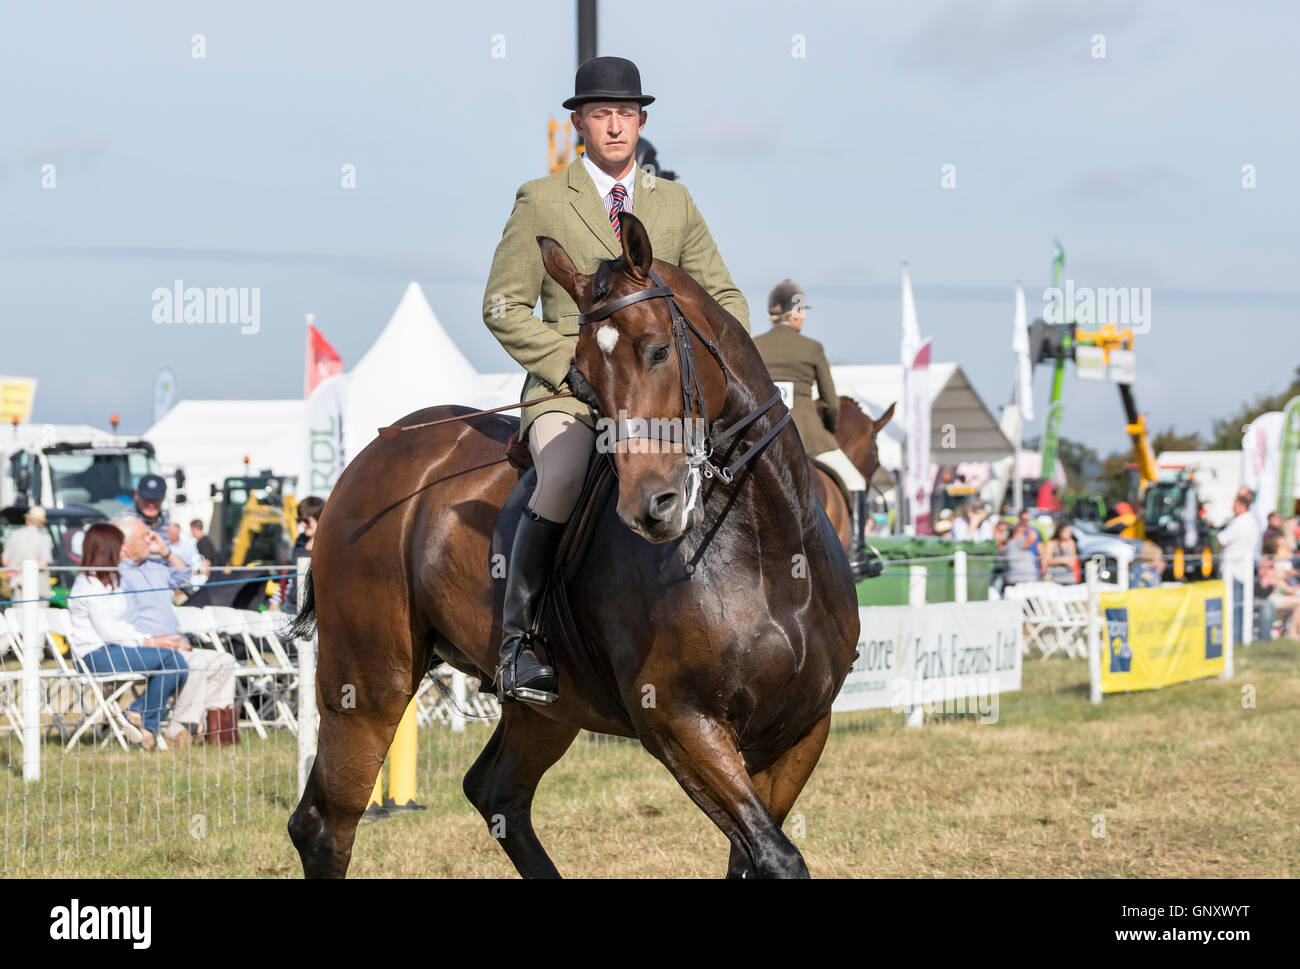 The Bucks County Show, Area Trial showjumping Ridden Hunter Championship Credit:  Scott Carruthers/Alamy Live News Stock Photo